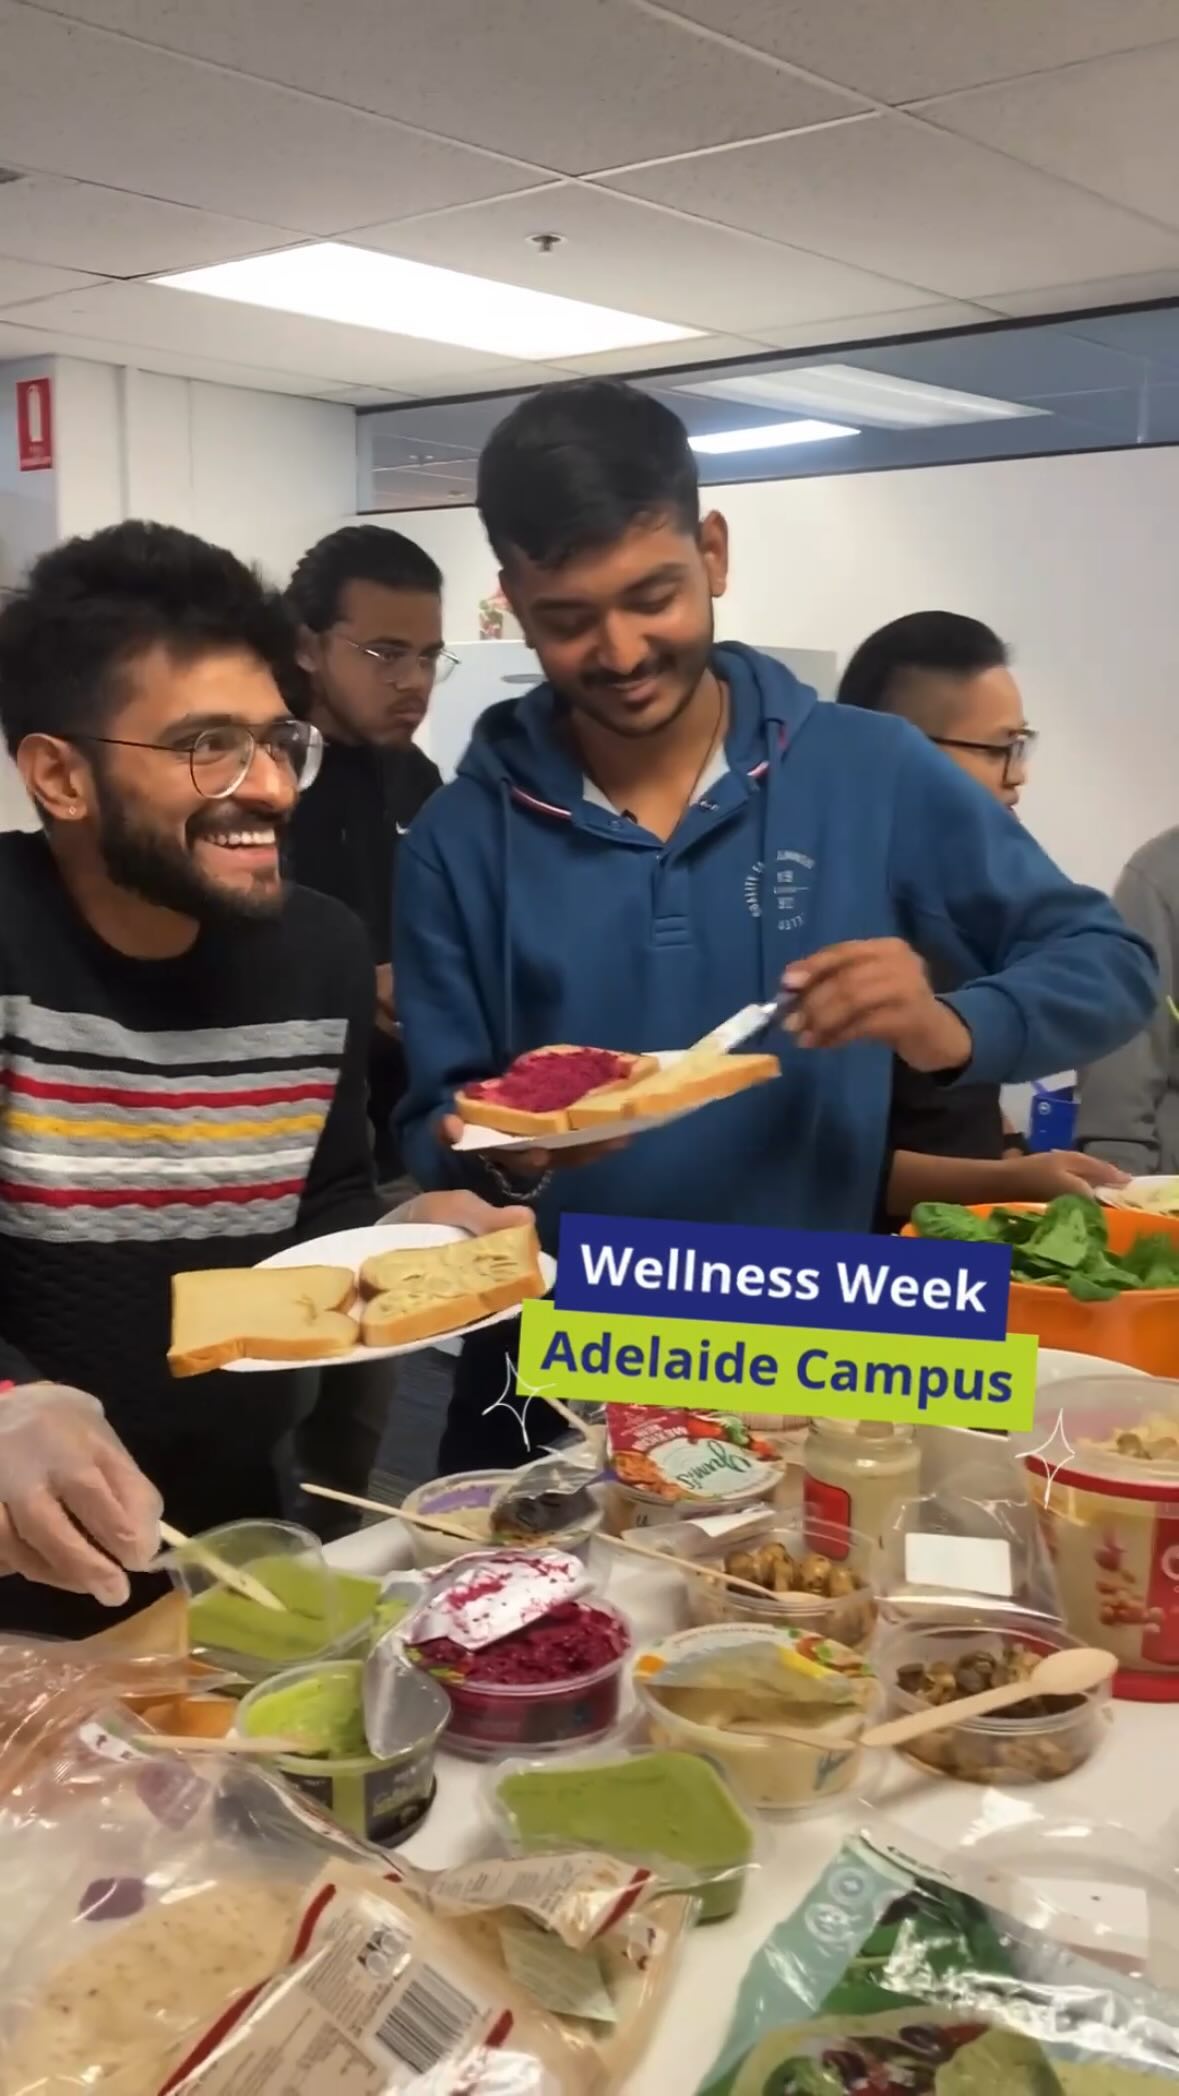 Celebrating Wellness Week in Adelaide, our students had the opportunity to gain fresh inspiration, discover new healthy brunch ideas, and celebrate the Sri Lankan New Yea. Thank you to everyone for joining the events! 🎉
#healthyeating #wellnessweek #sinhalesenewyear #kbsadelaide #studykbs